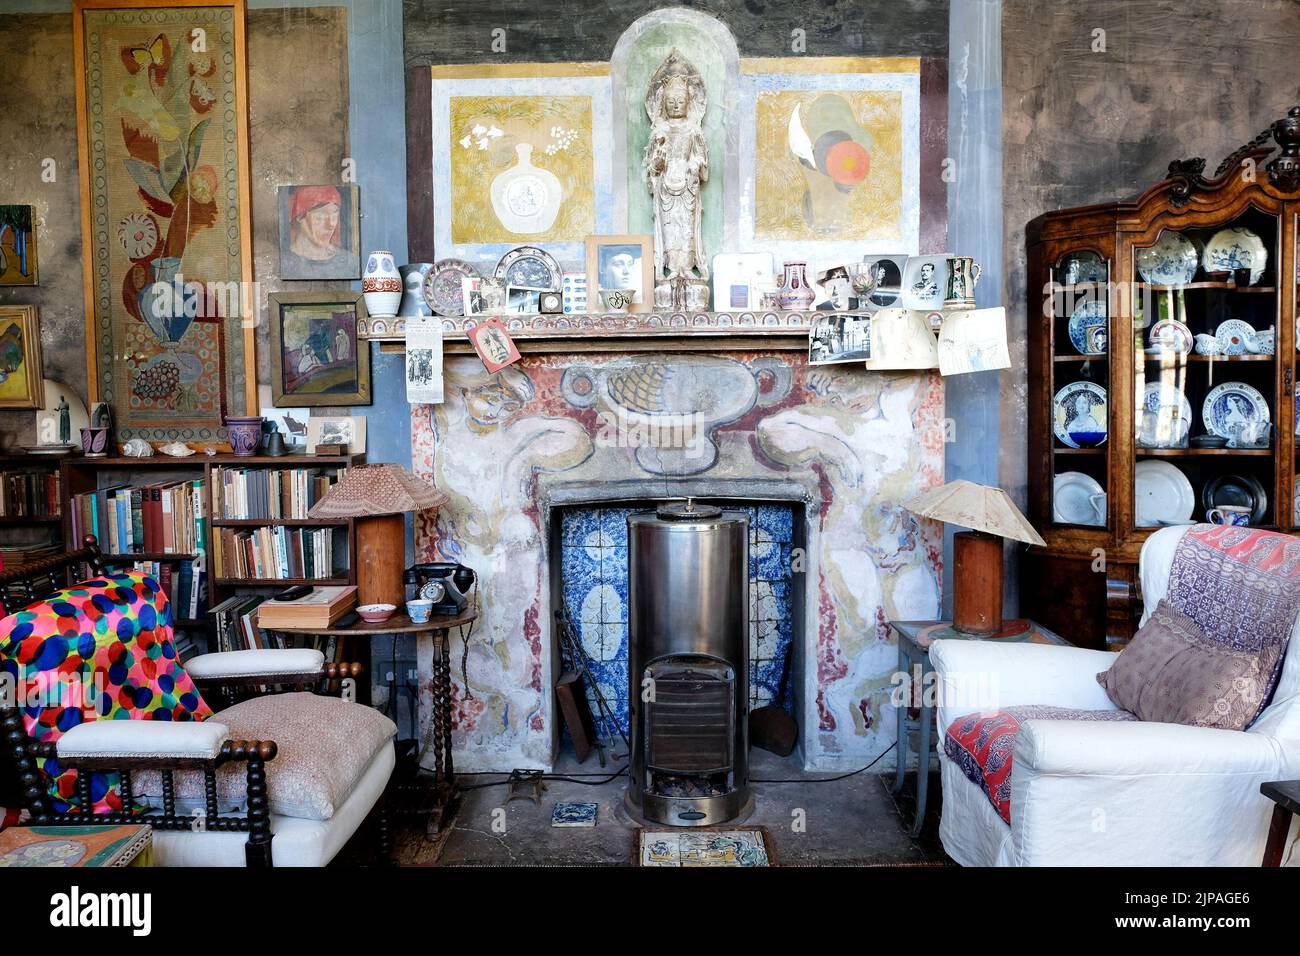 The studio at Charleston Farmhouse, near Lewes, East Sussex, England, home of the Bloomsbury Set. It was the country home of Vanessa Bell and Duncan Grant and is an example of their decorative style within a domestic context, representing the fruition of more than sixty years of artistic creativity. Stock Photo